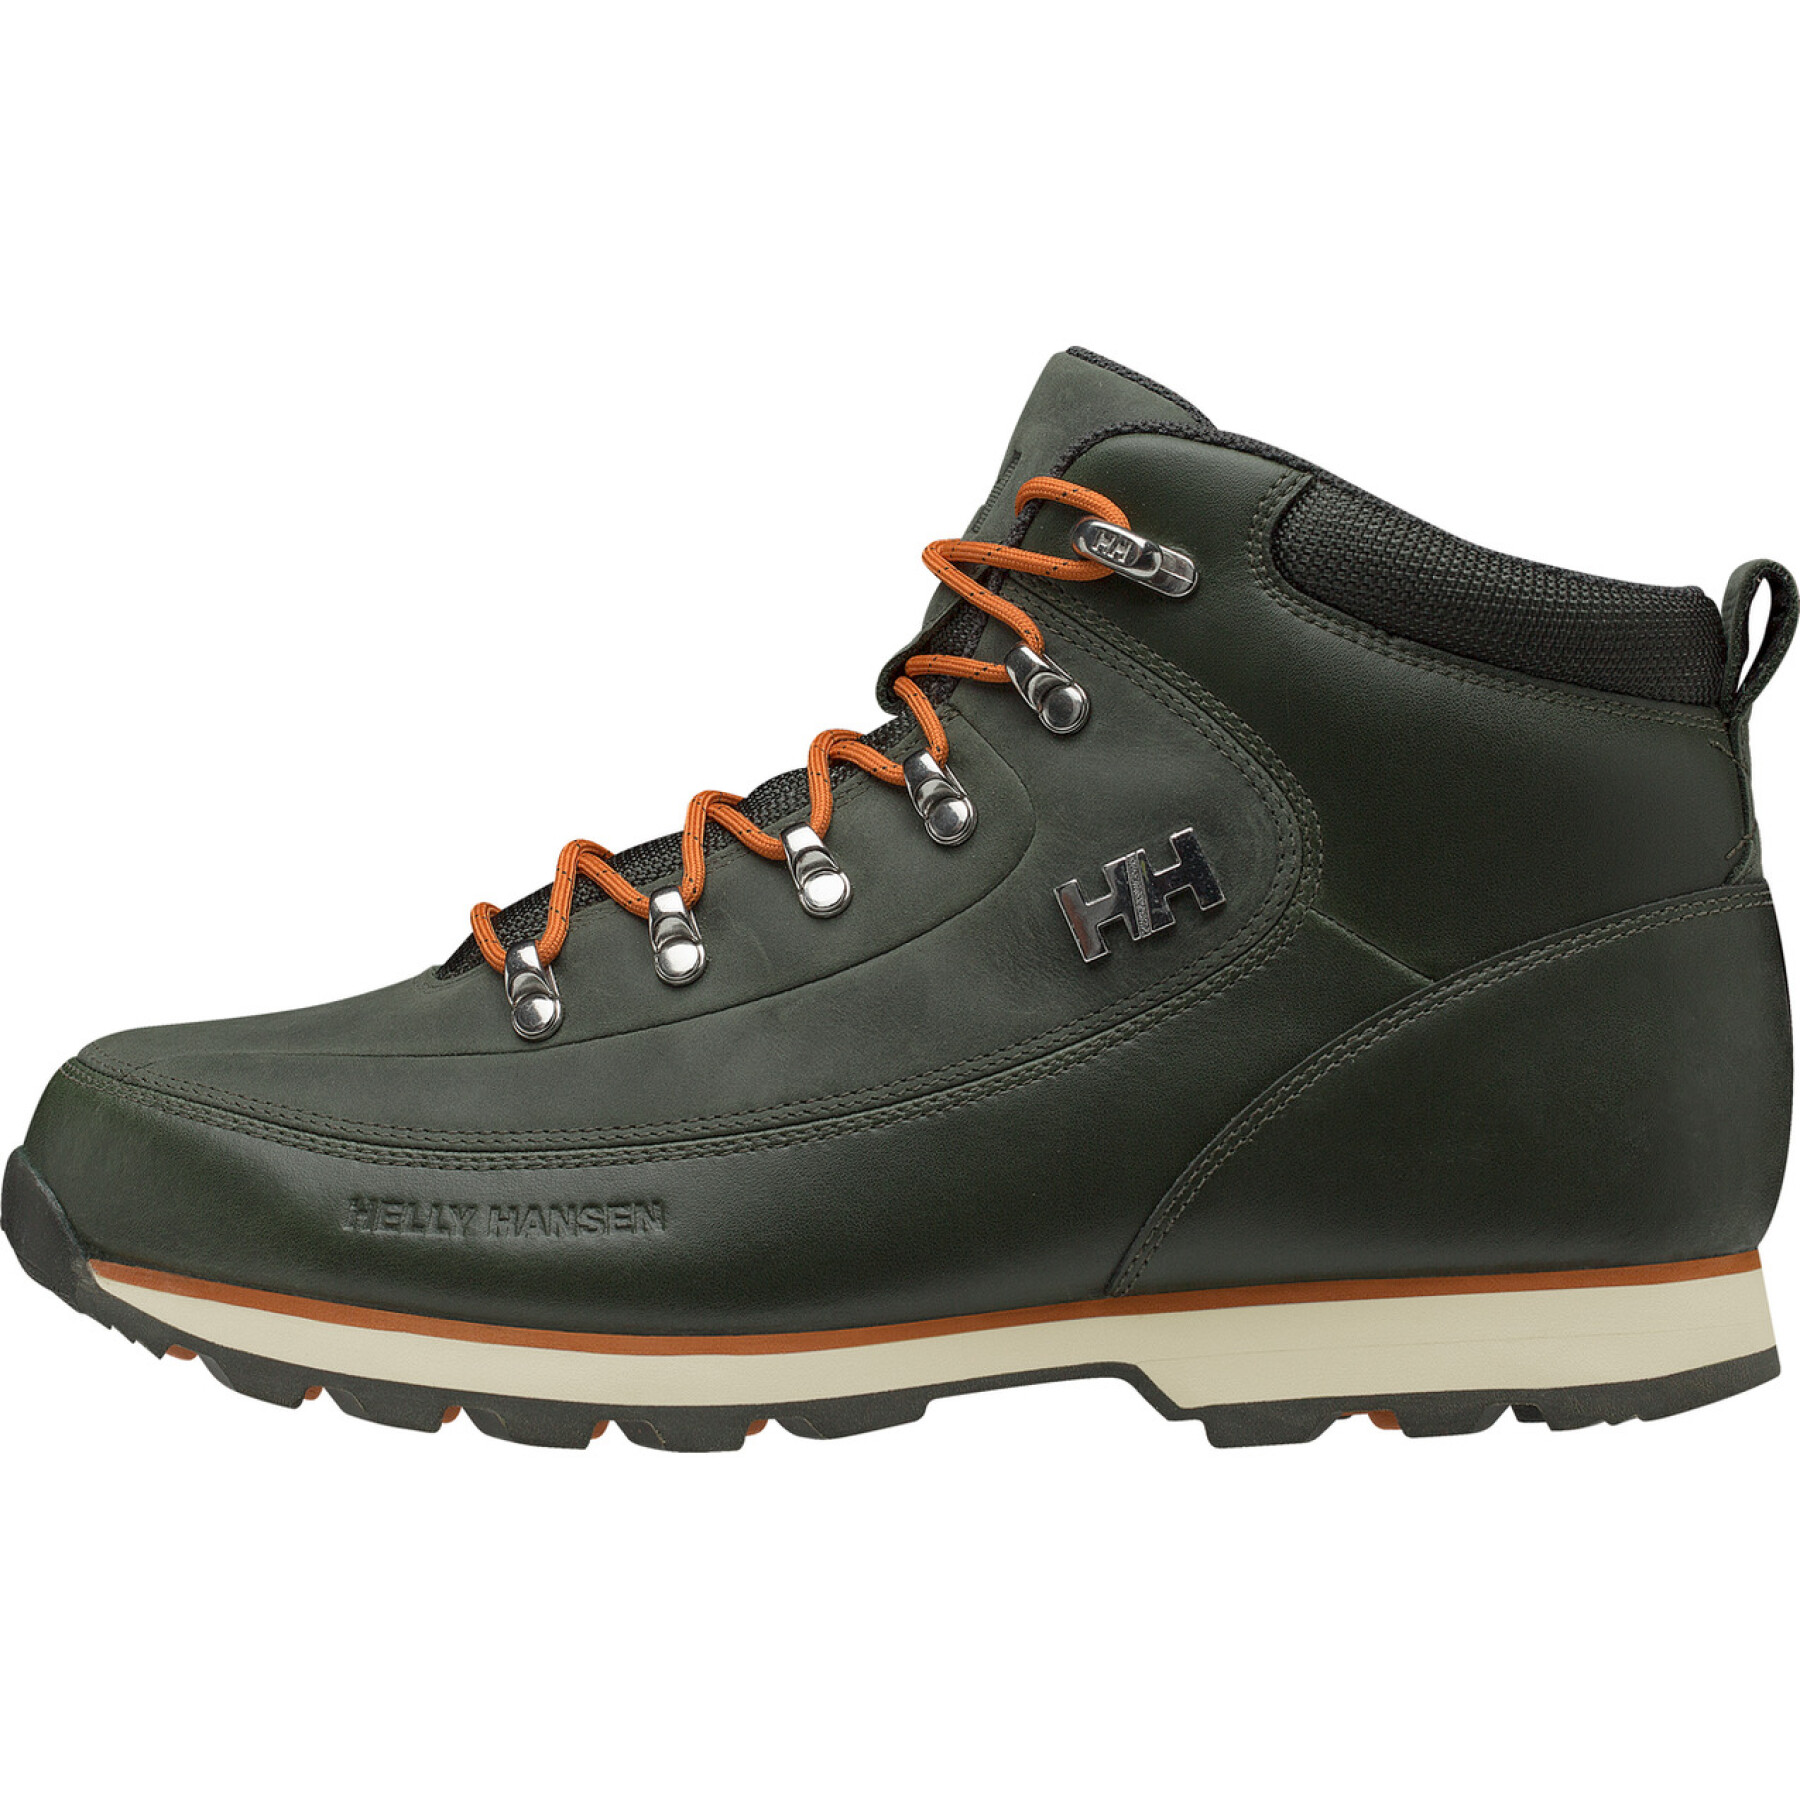 Hiking shoes Helly Hansen The Forester